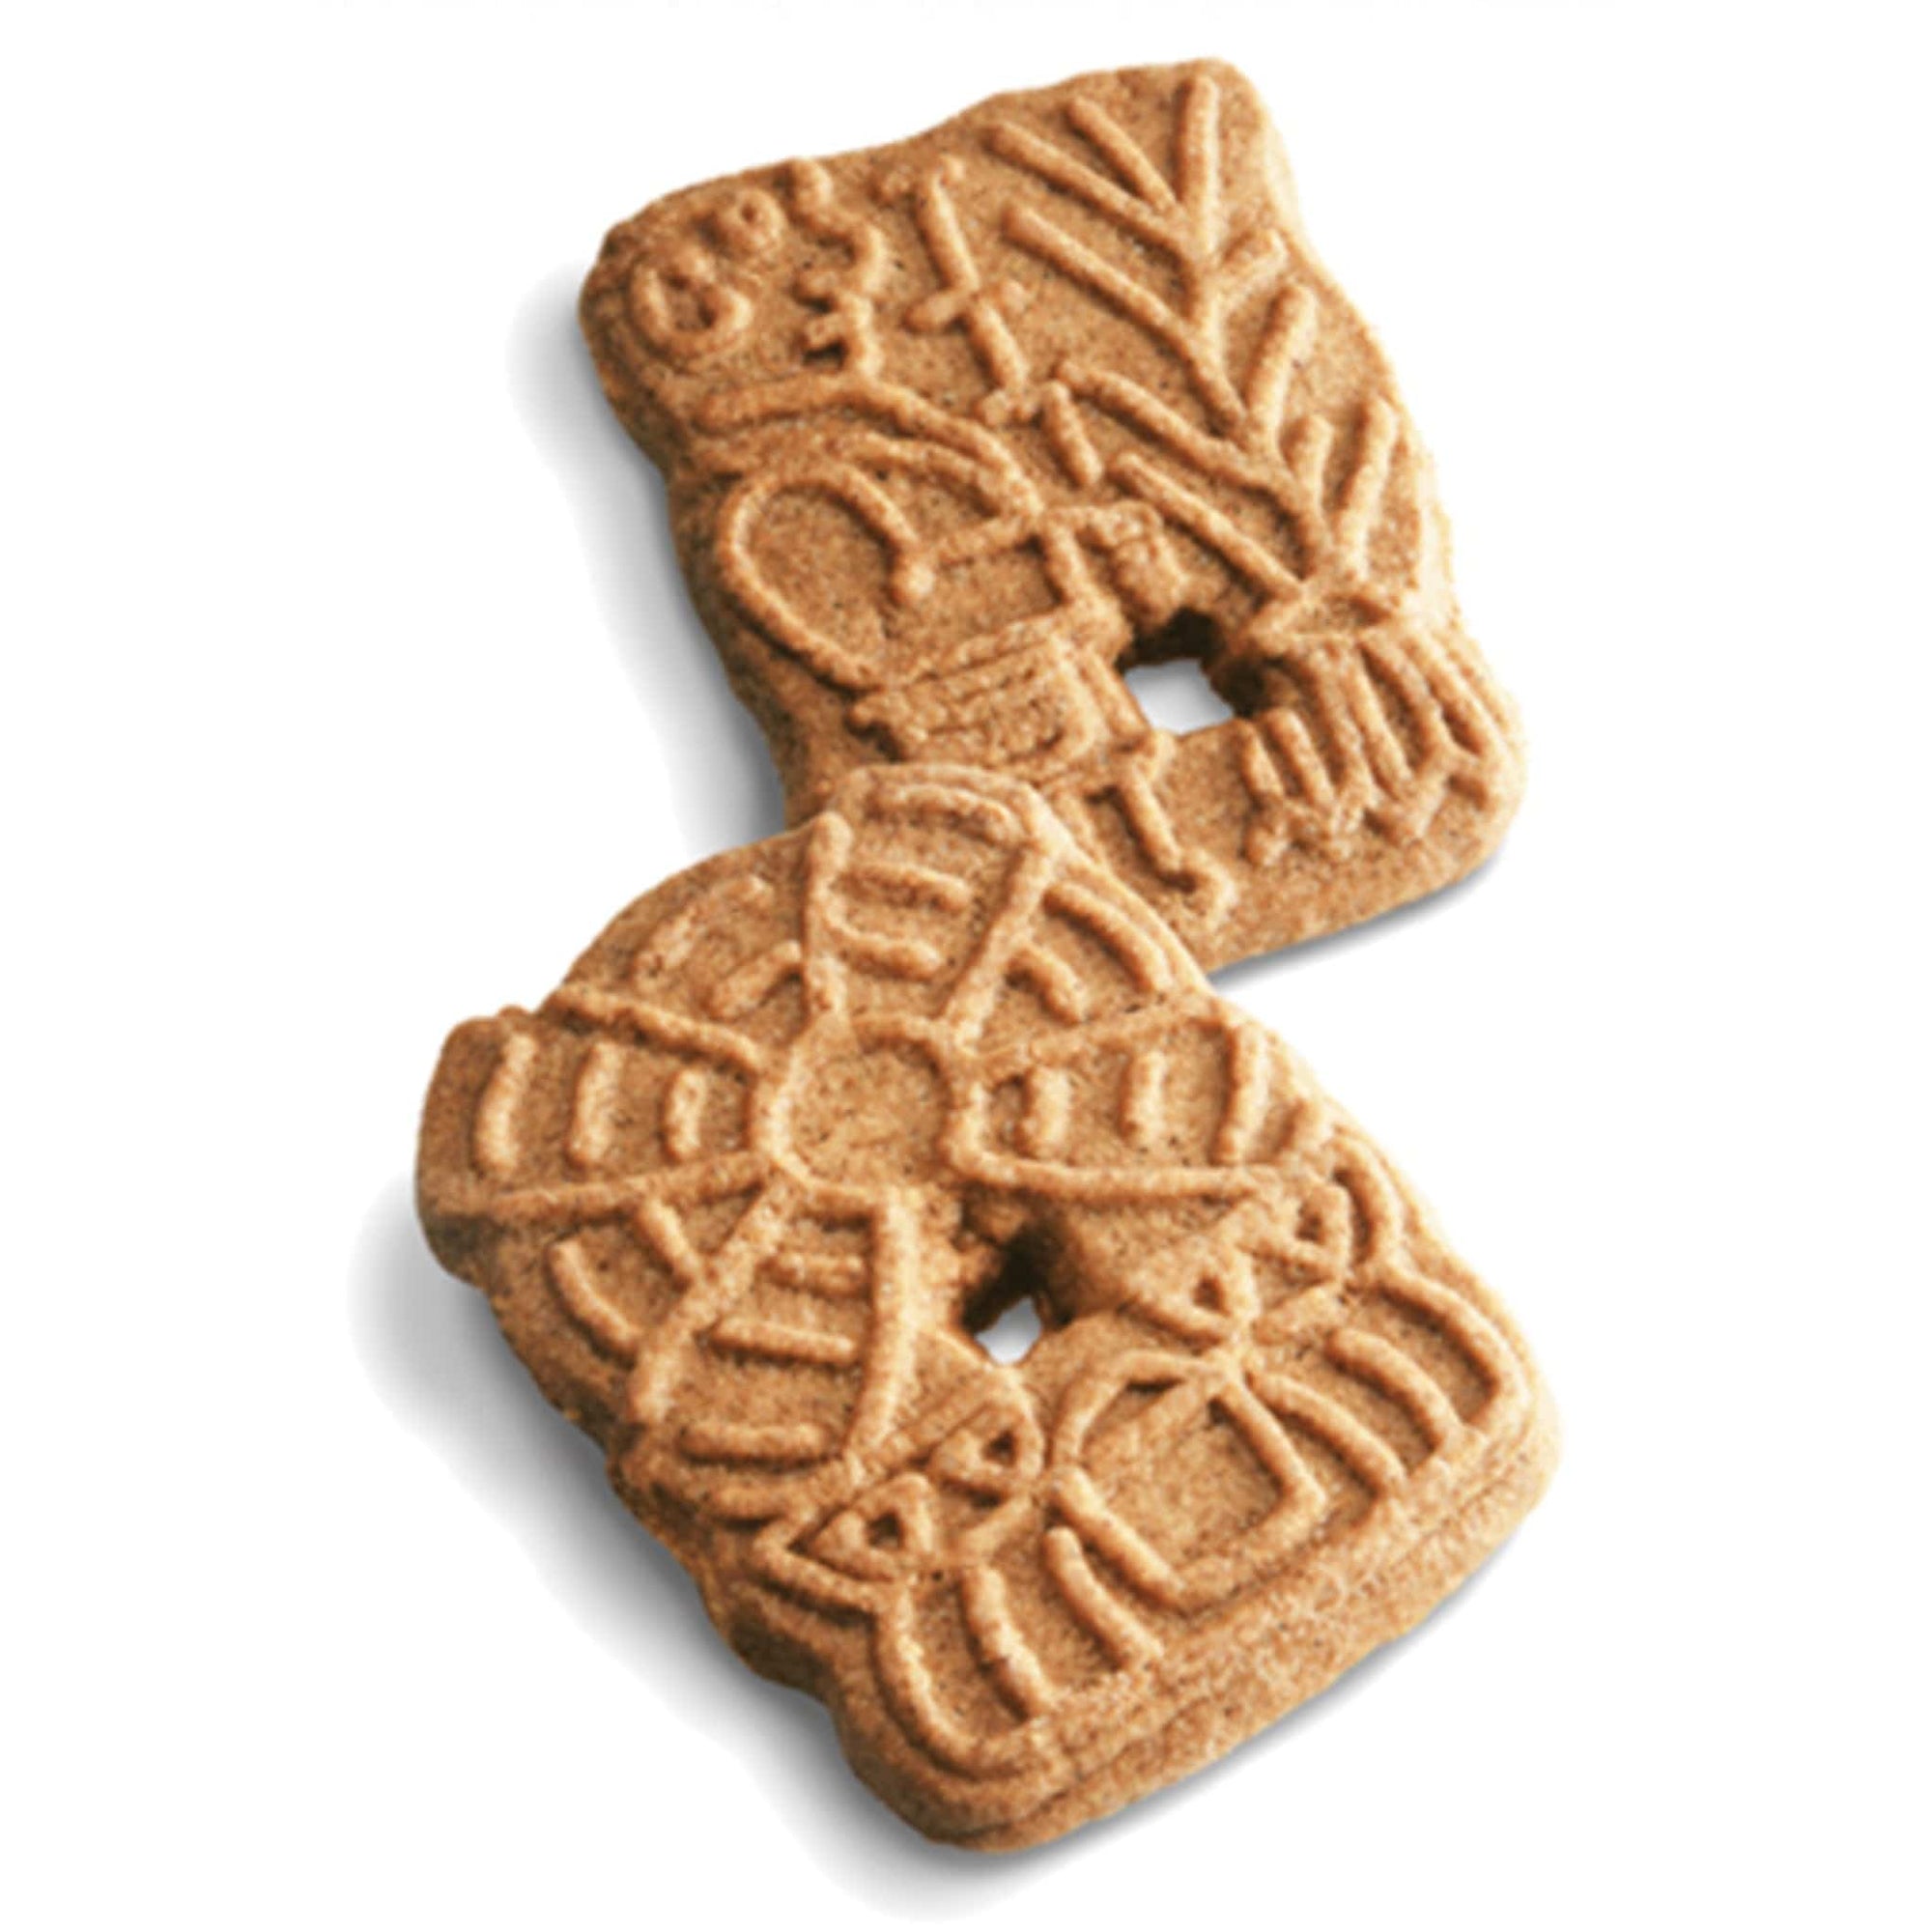 The Old Mill The Old Mill Speculaas Spiced Biscuits